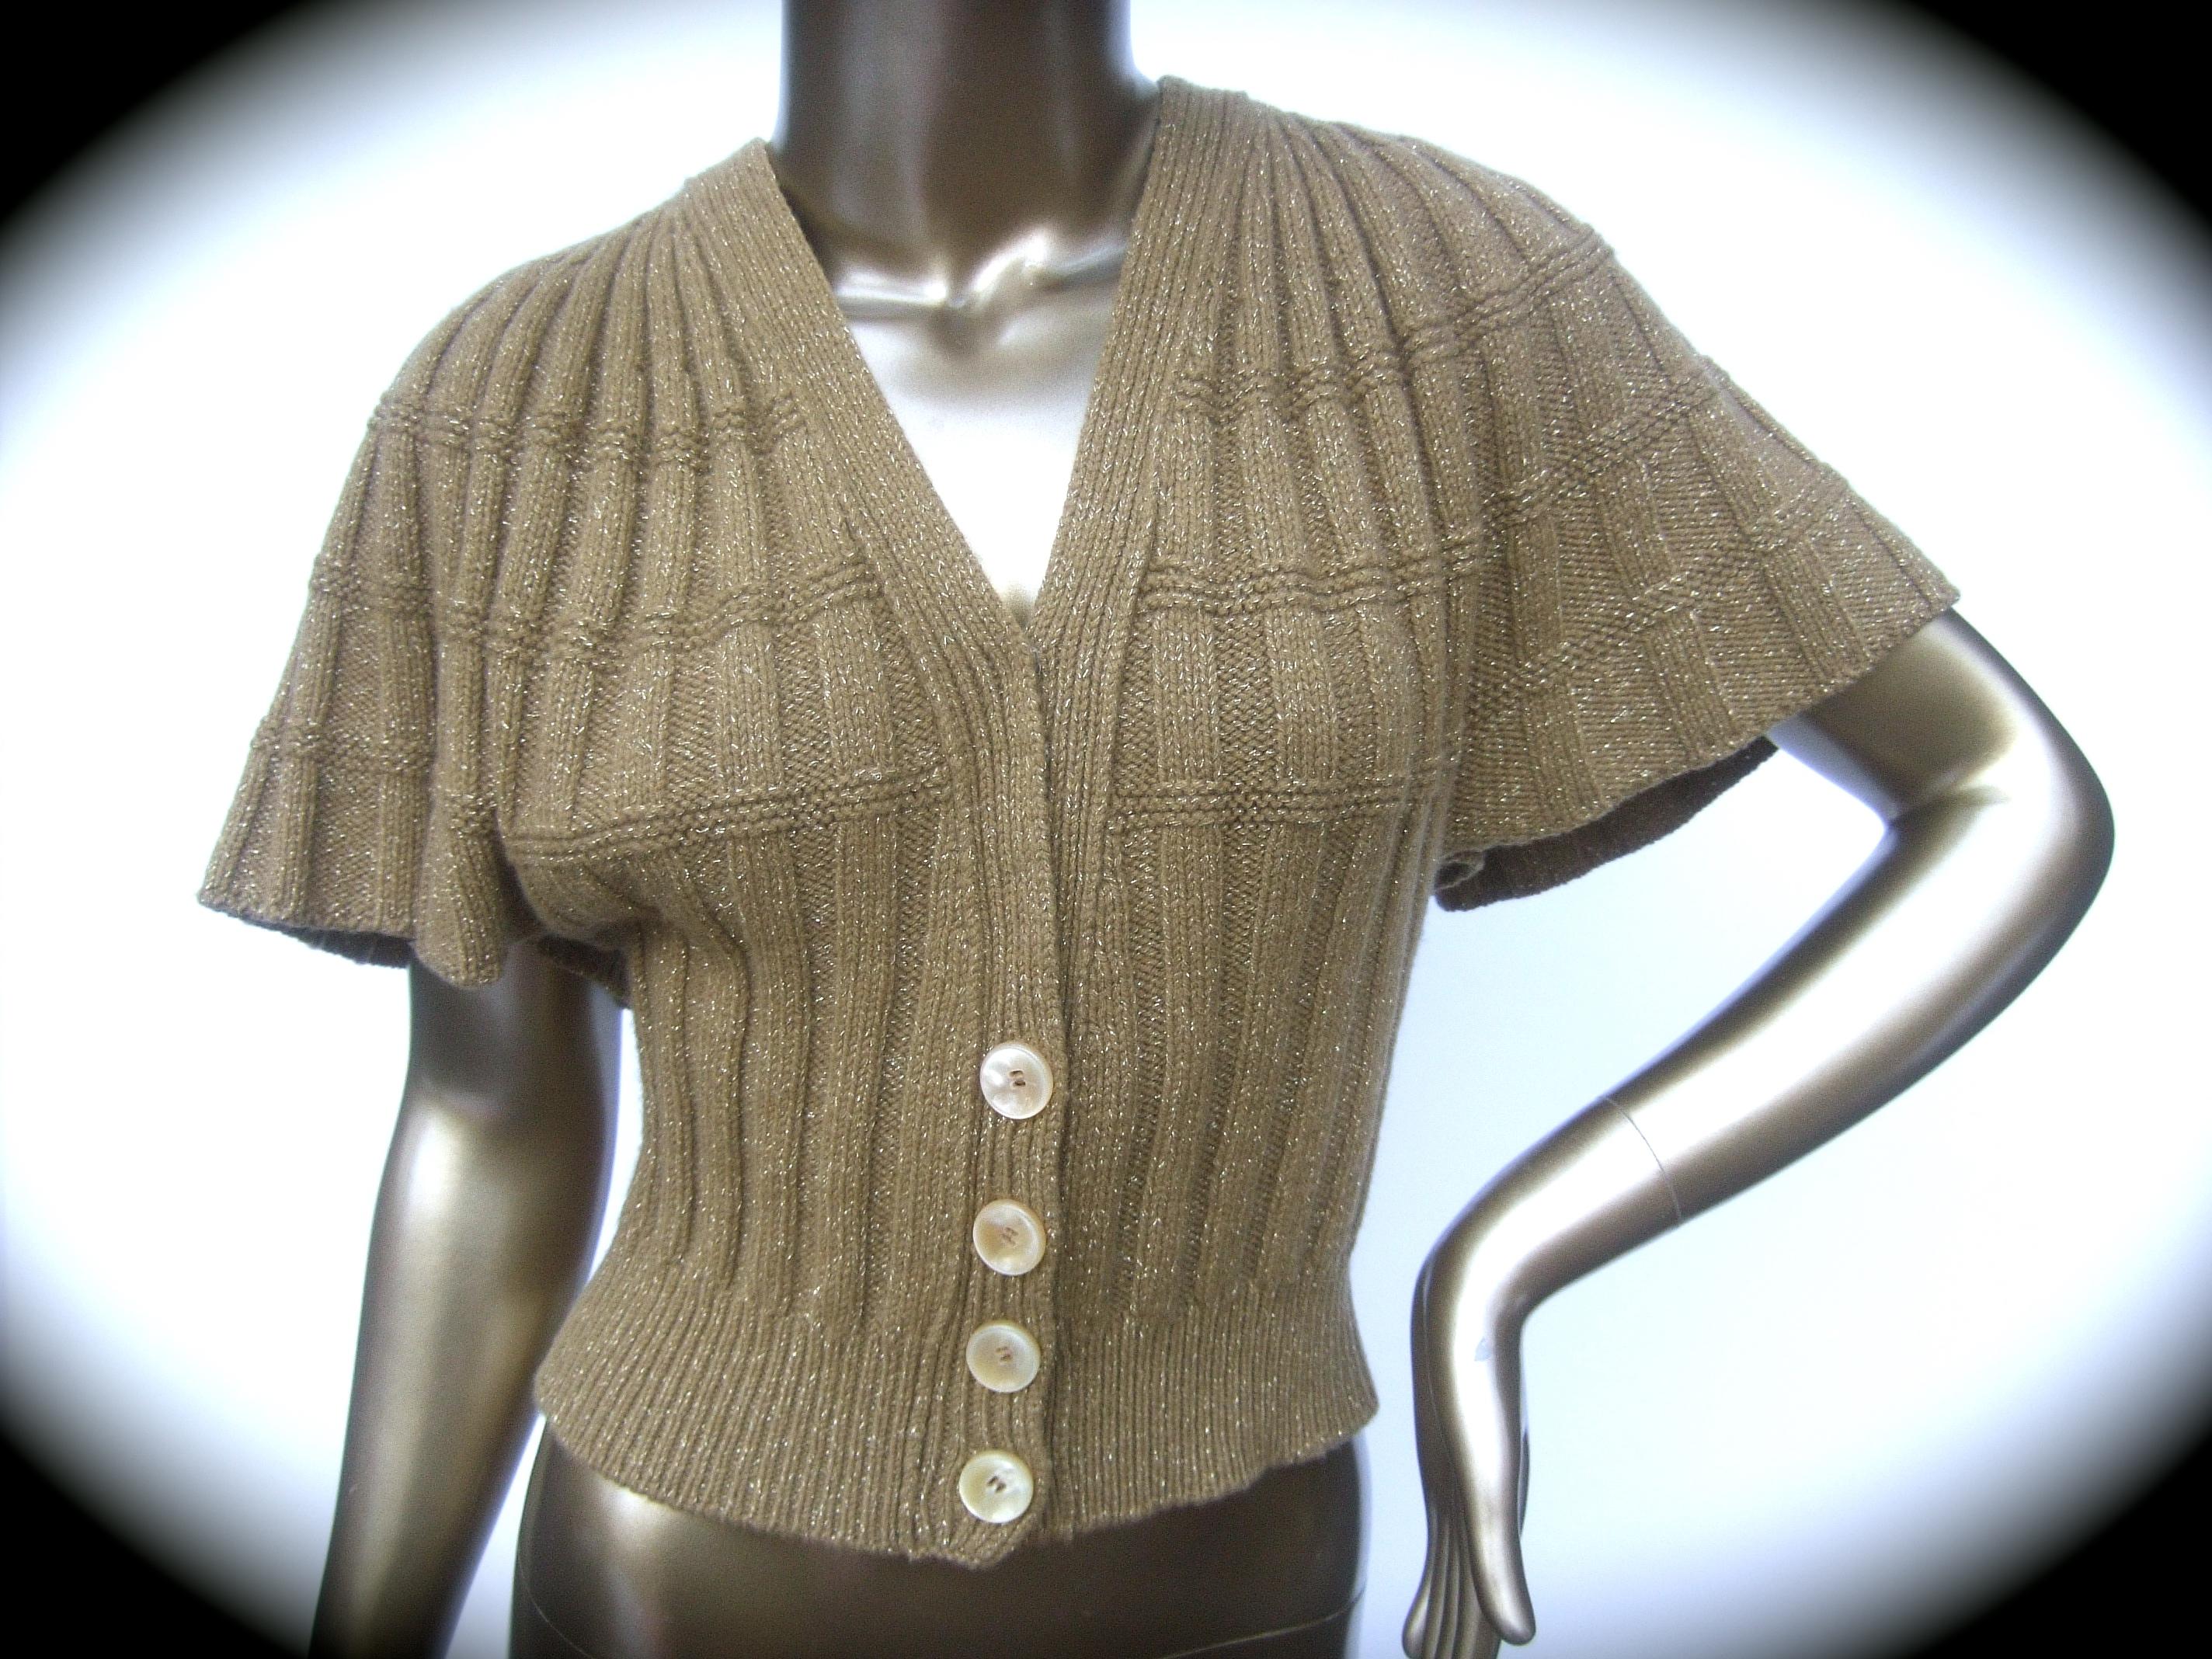 Louis Vuitton Paris Italian knit brown cardigan sweater Size M
The chic Italian knit cardigan is designed with a muted light brown shade; accented with subtle gold metallic knit bands throughout

The ribbed knit cardigan has wide voluminous partial